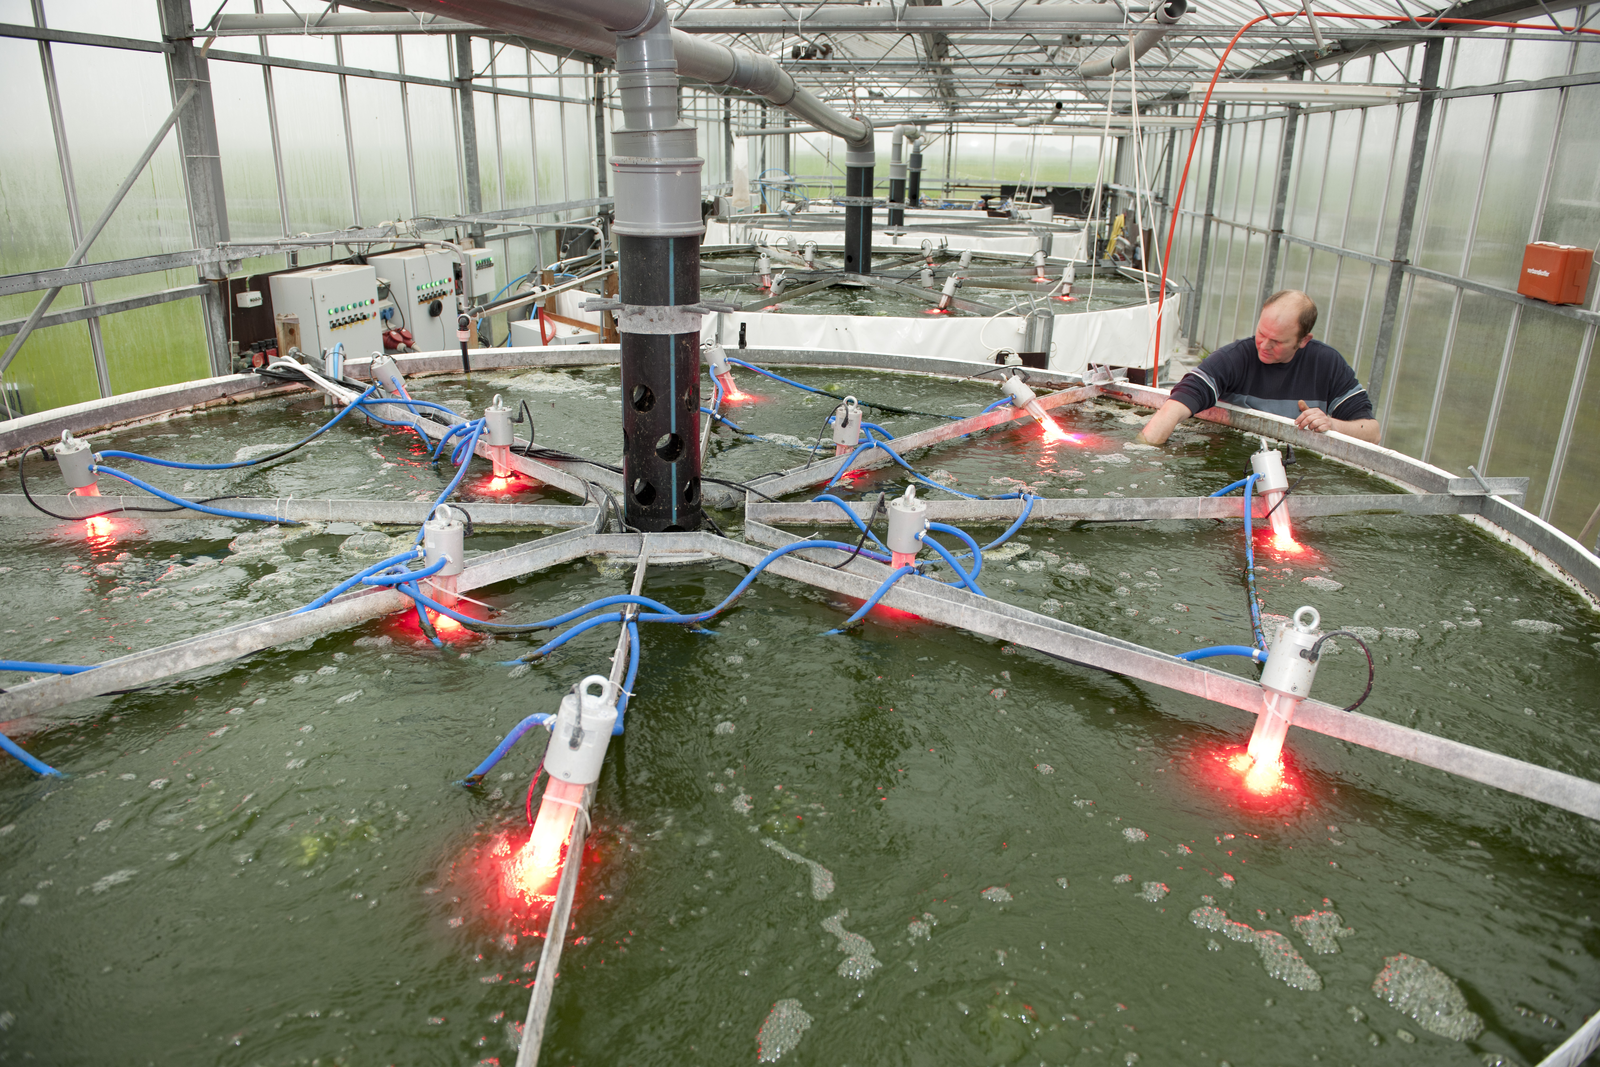 Algae as a promising new type of animal feed